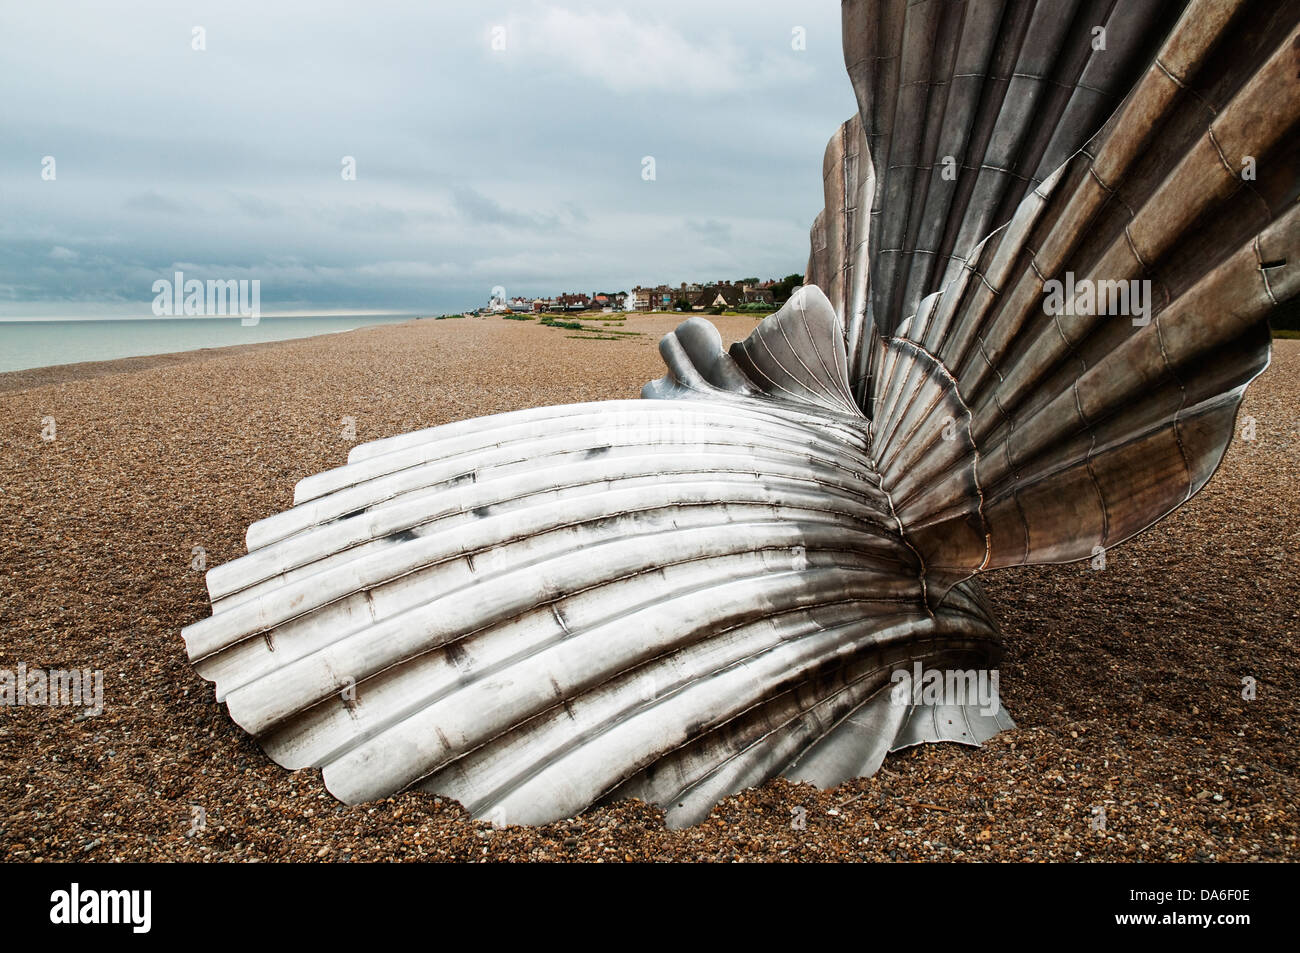 Steel 'Scallop shell' sculpture on the beech at Aldeburgh in Suffolk, England. Stock Photo